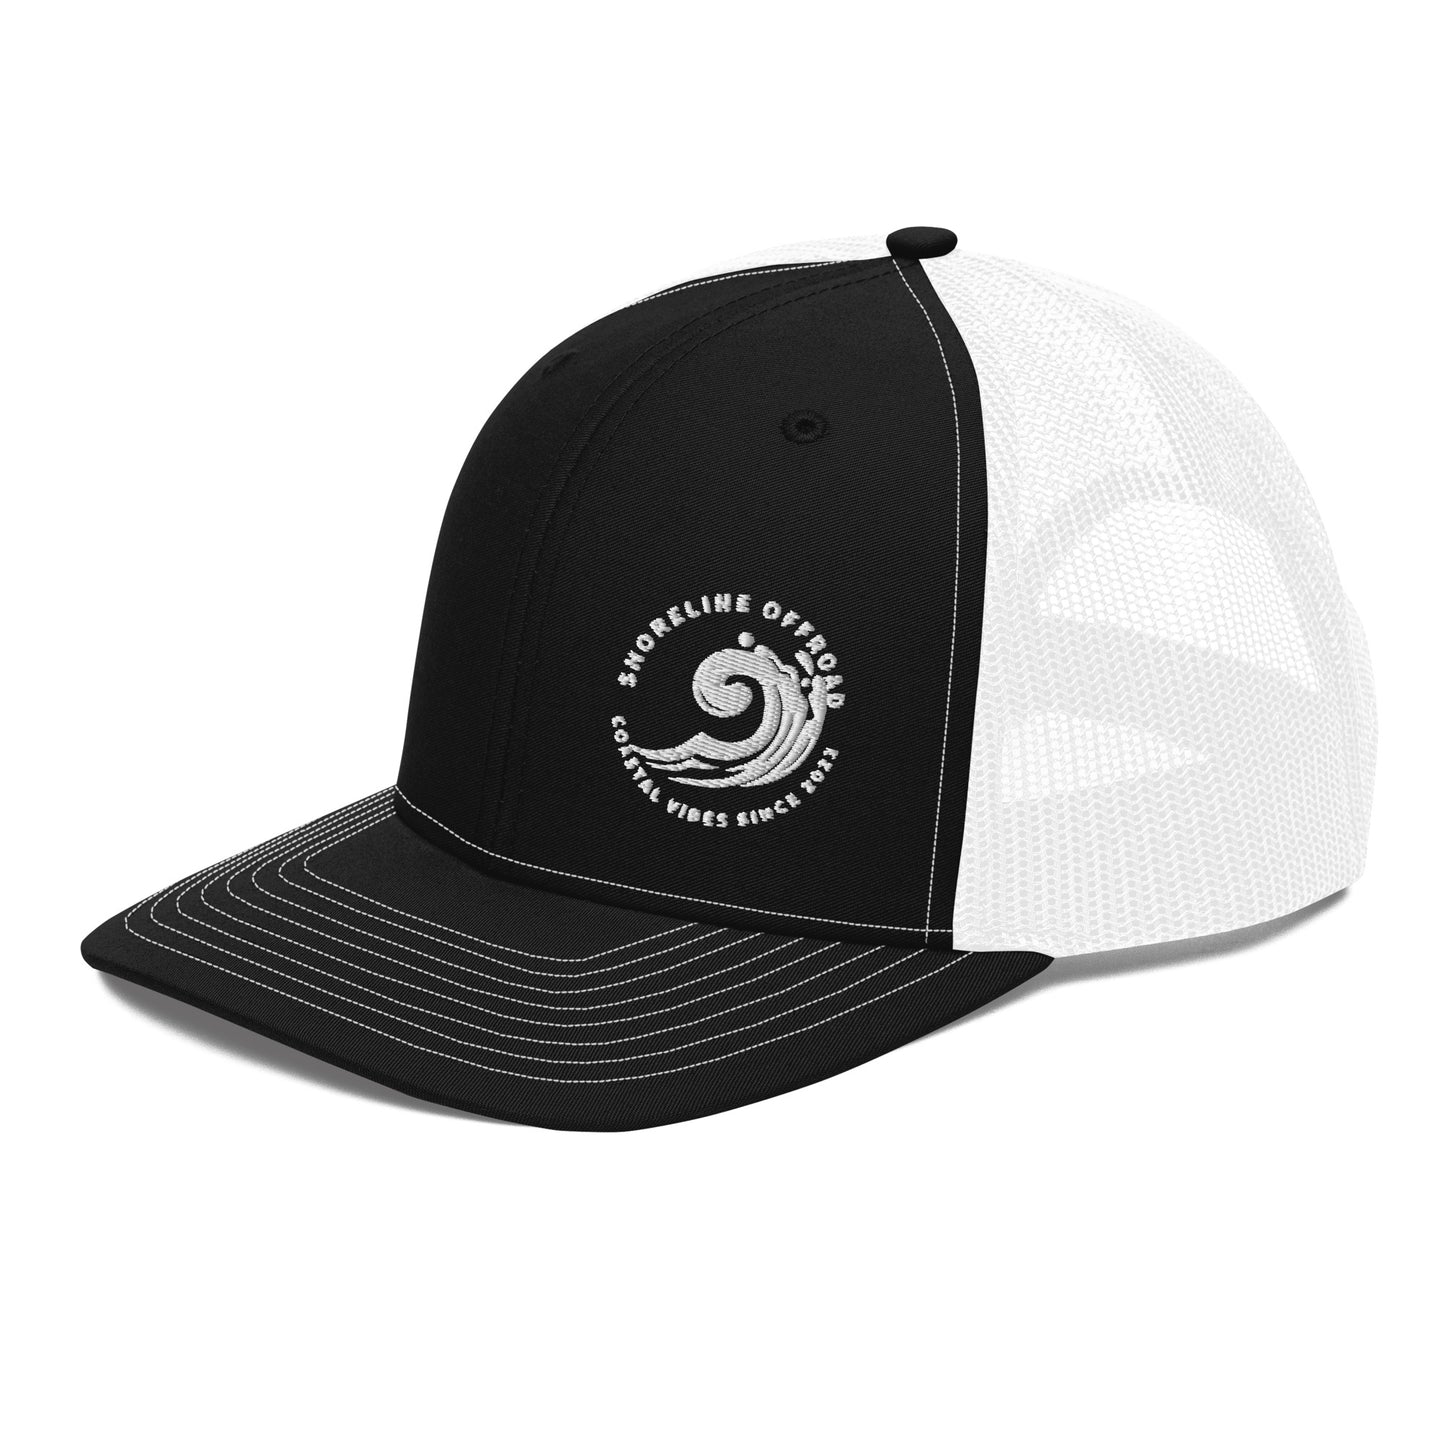 a black and white trucker hat with a white logo